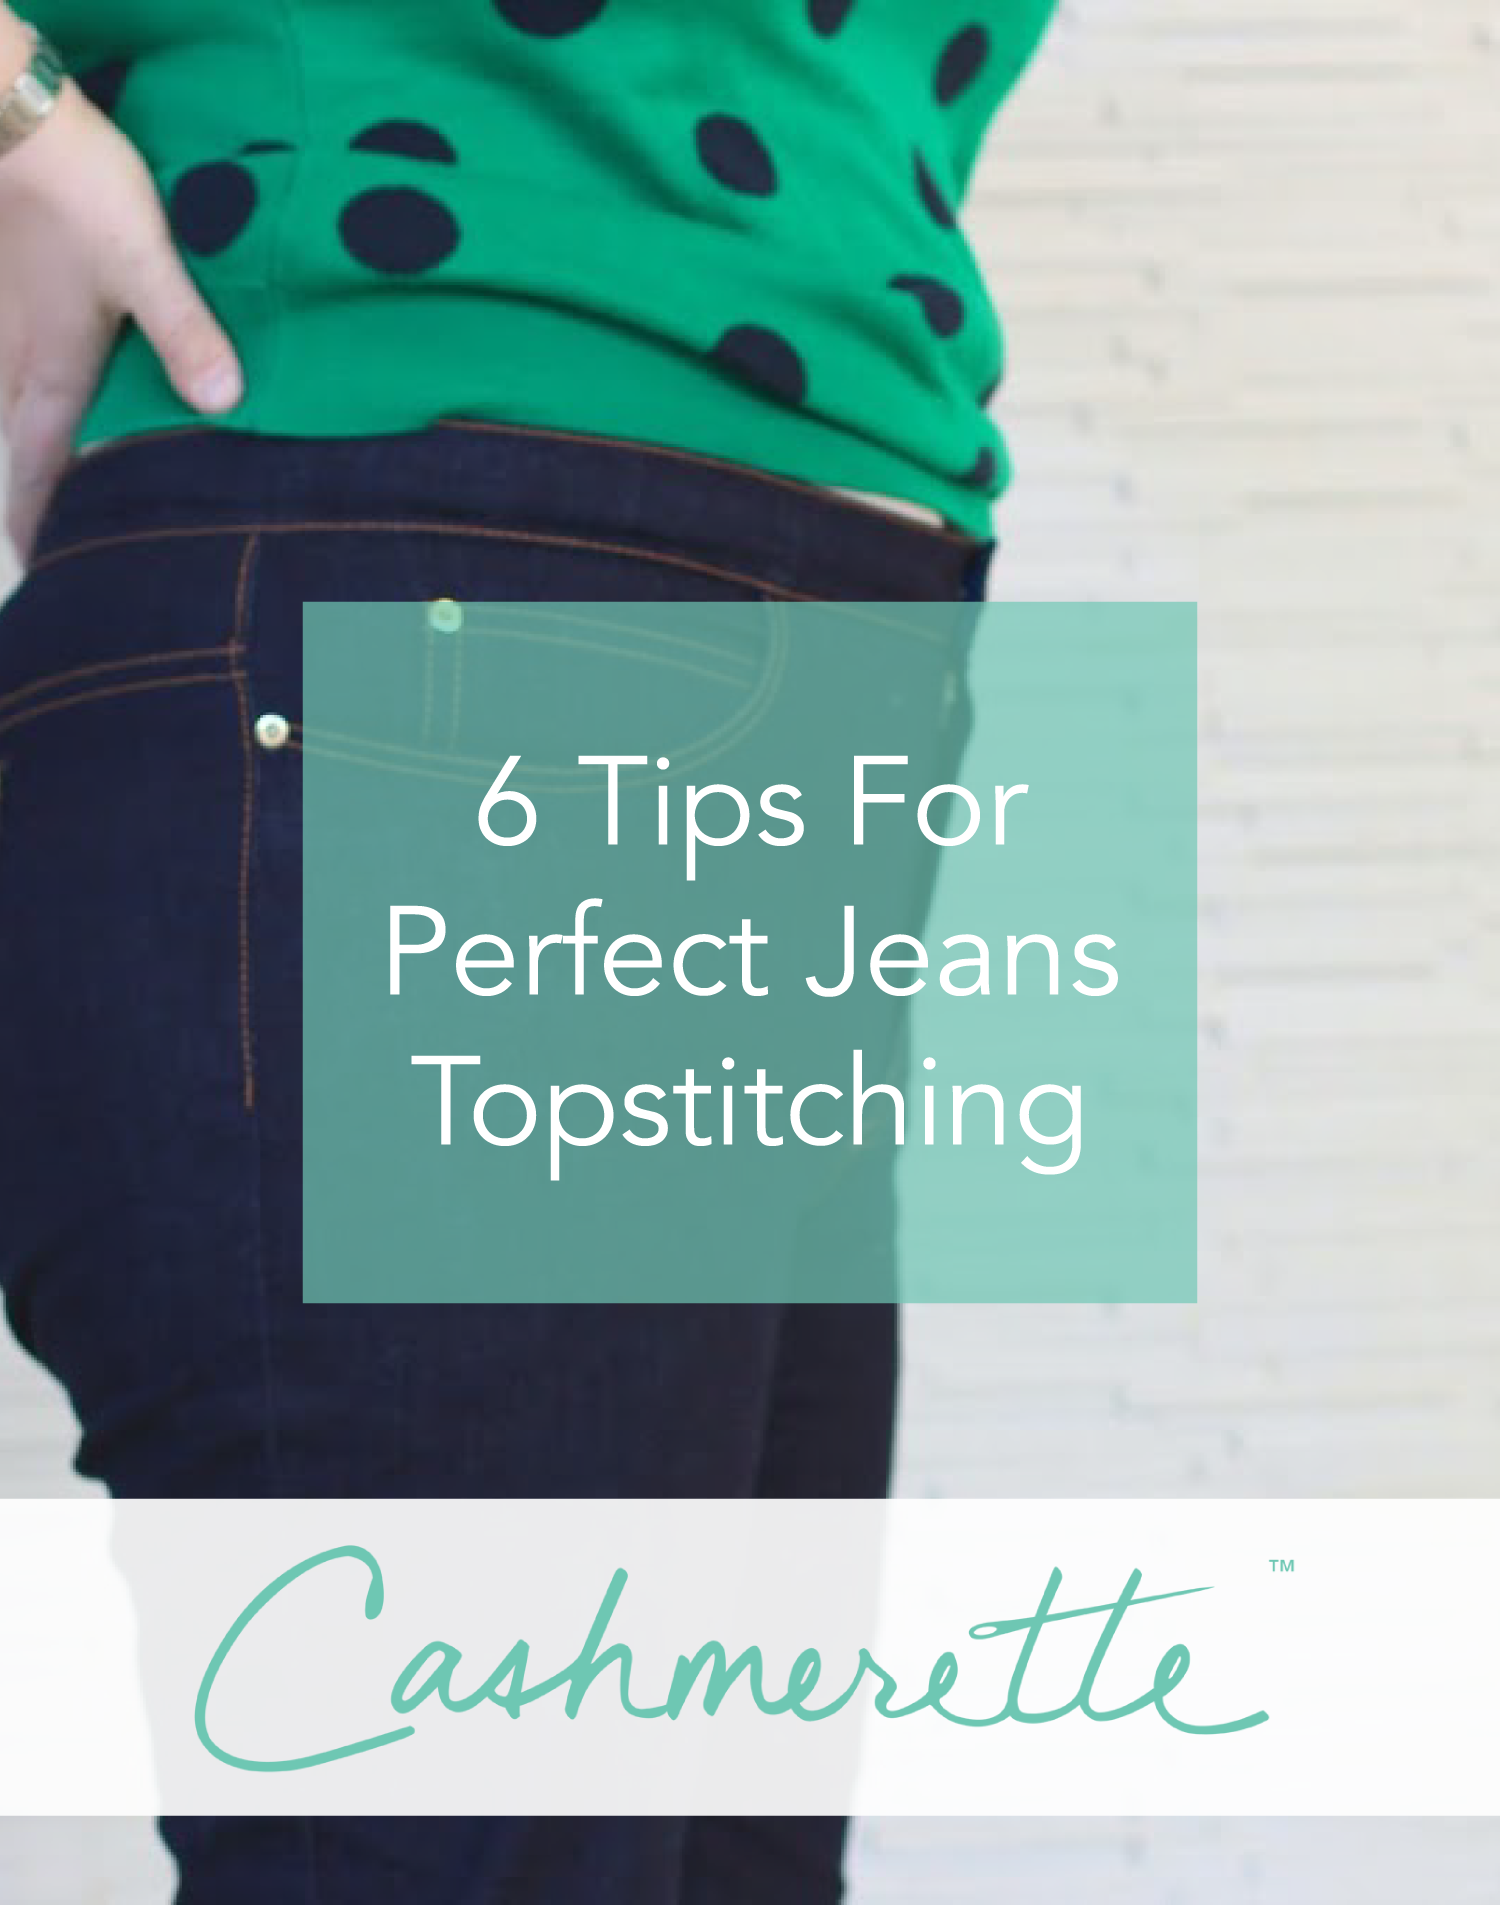 Tutorial: 6 tips for nice jeans topstitching